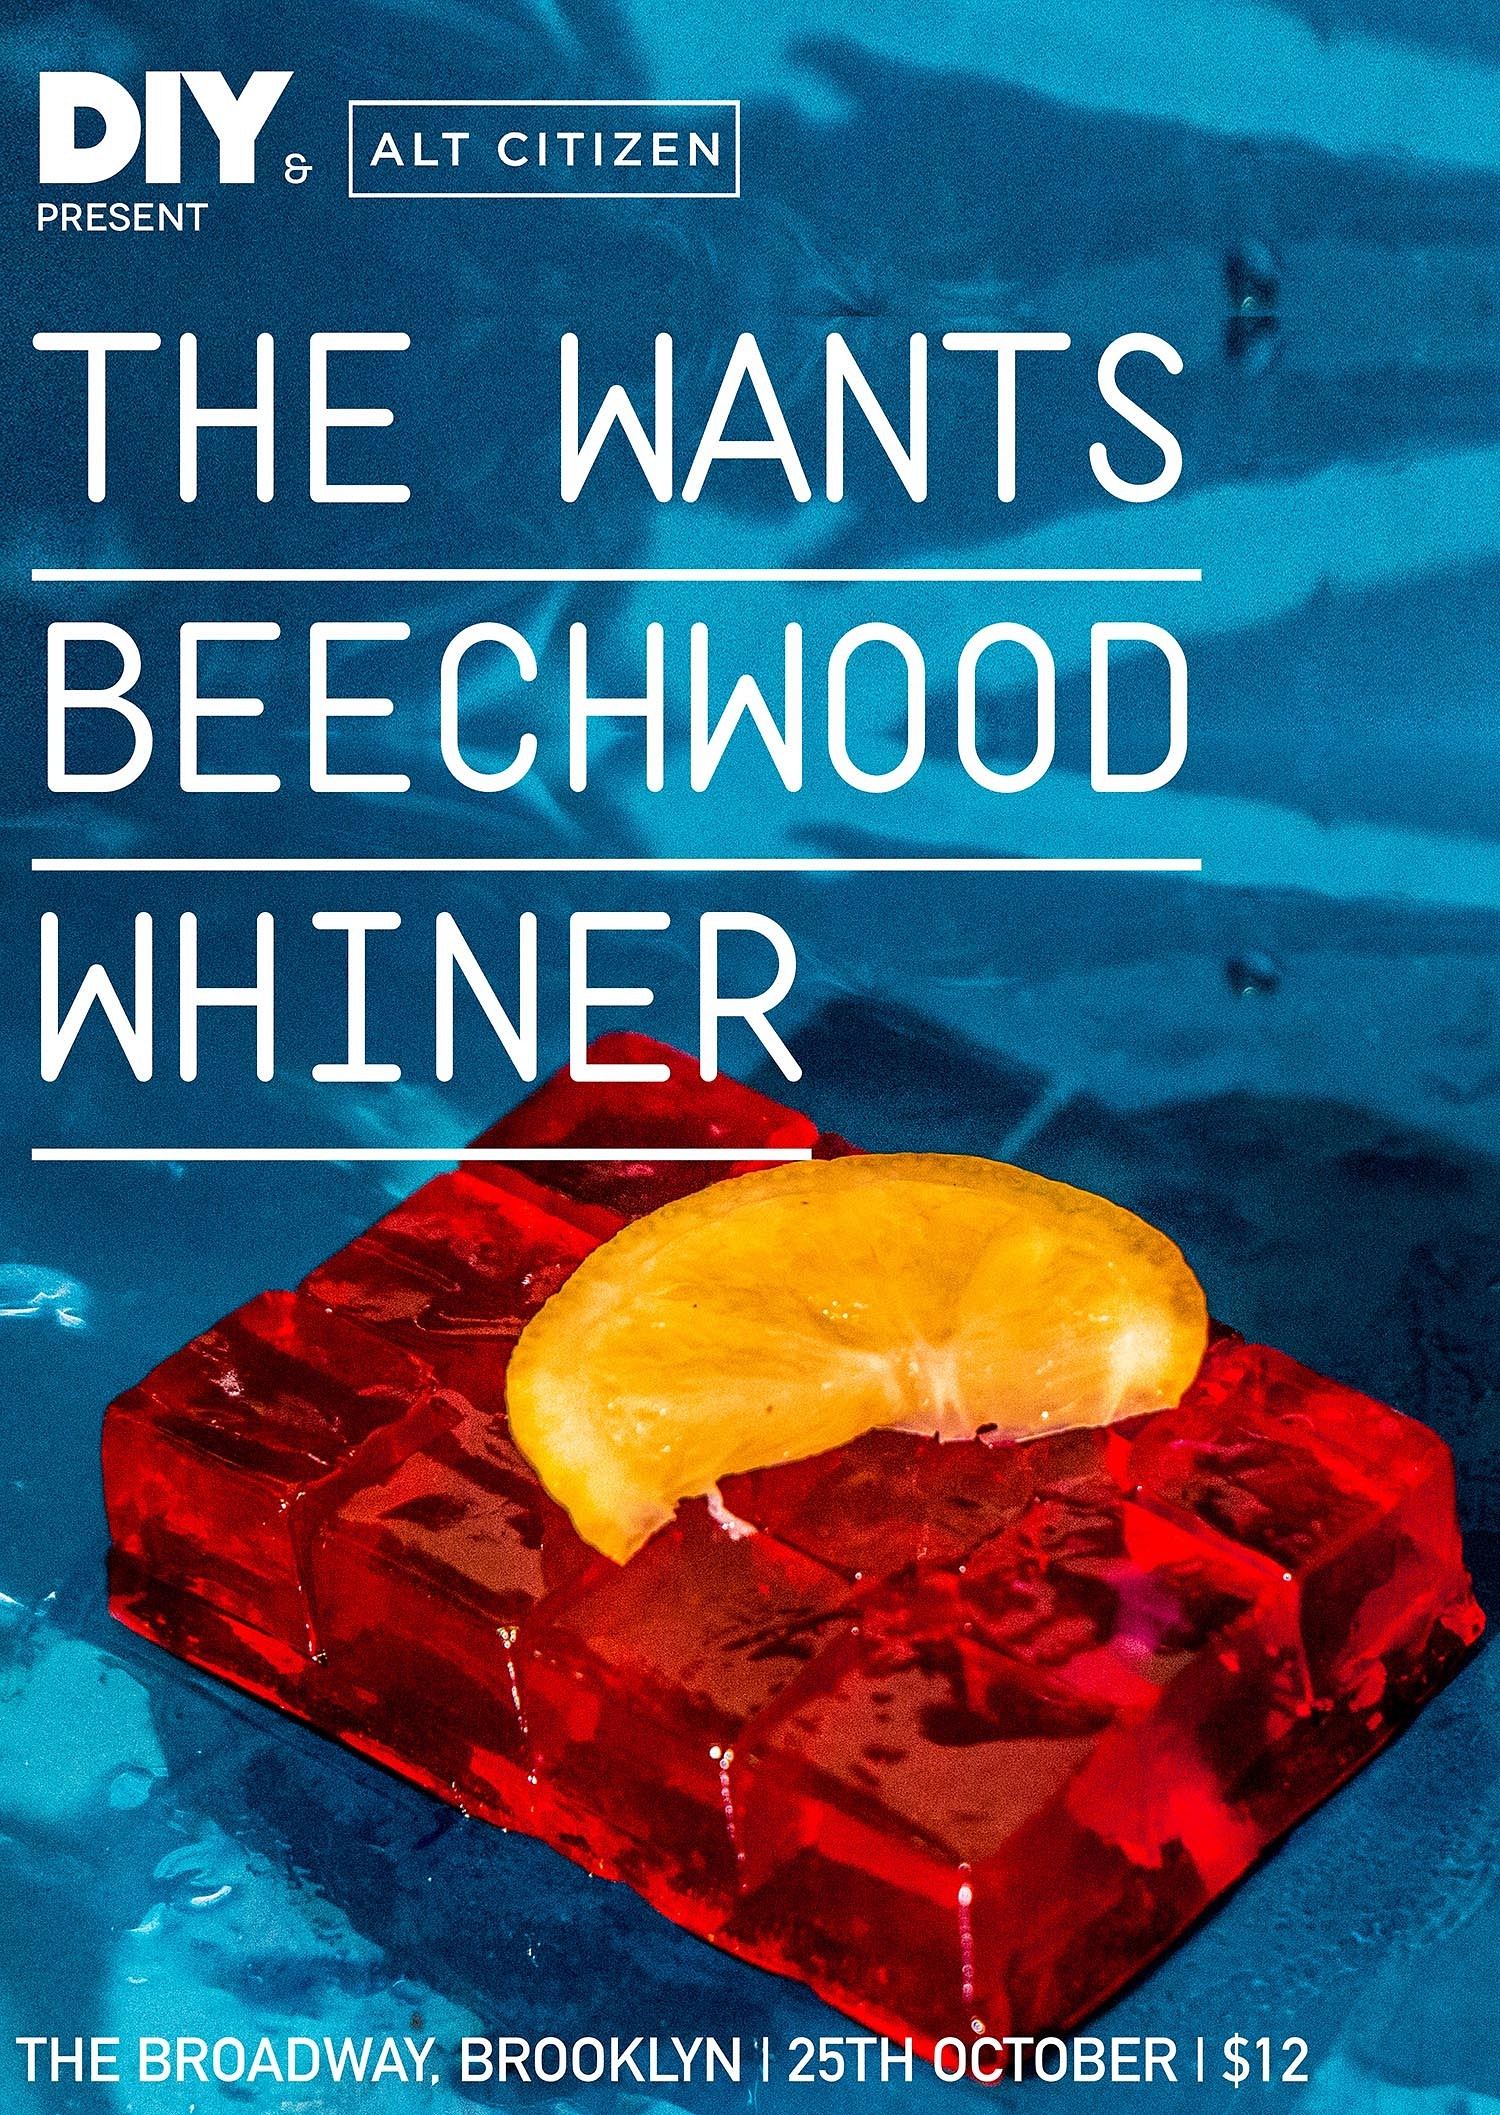 The Wants, Beechwood & Whiner for next DIY & Alt Citizen show